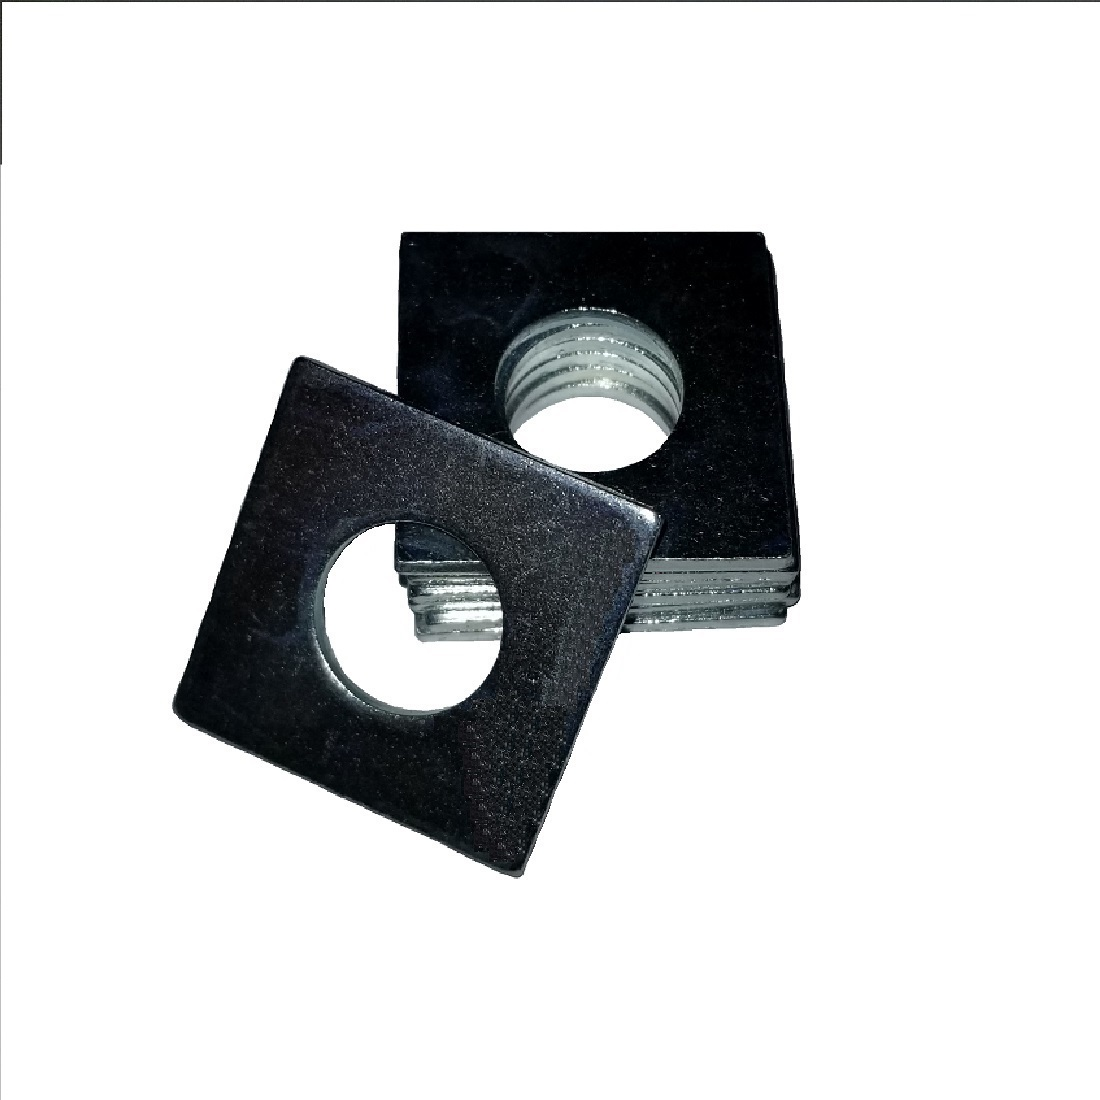 Square OD Washer - 0.250 ID, 0.750 OD, 0.125 Thick, Low Carbon Steel - Soft